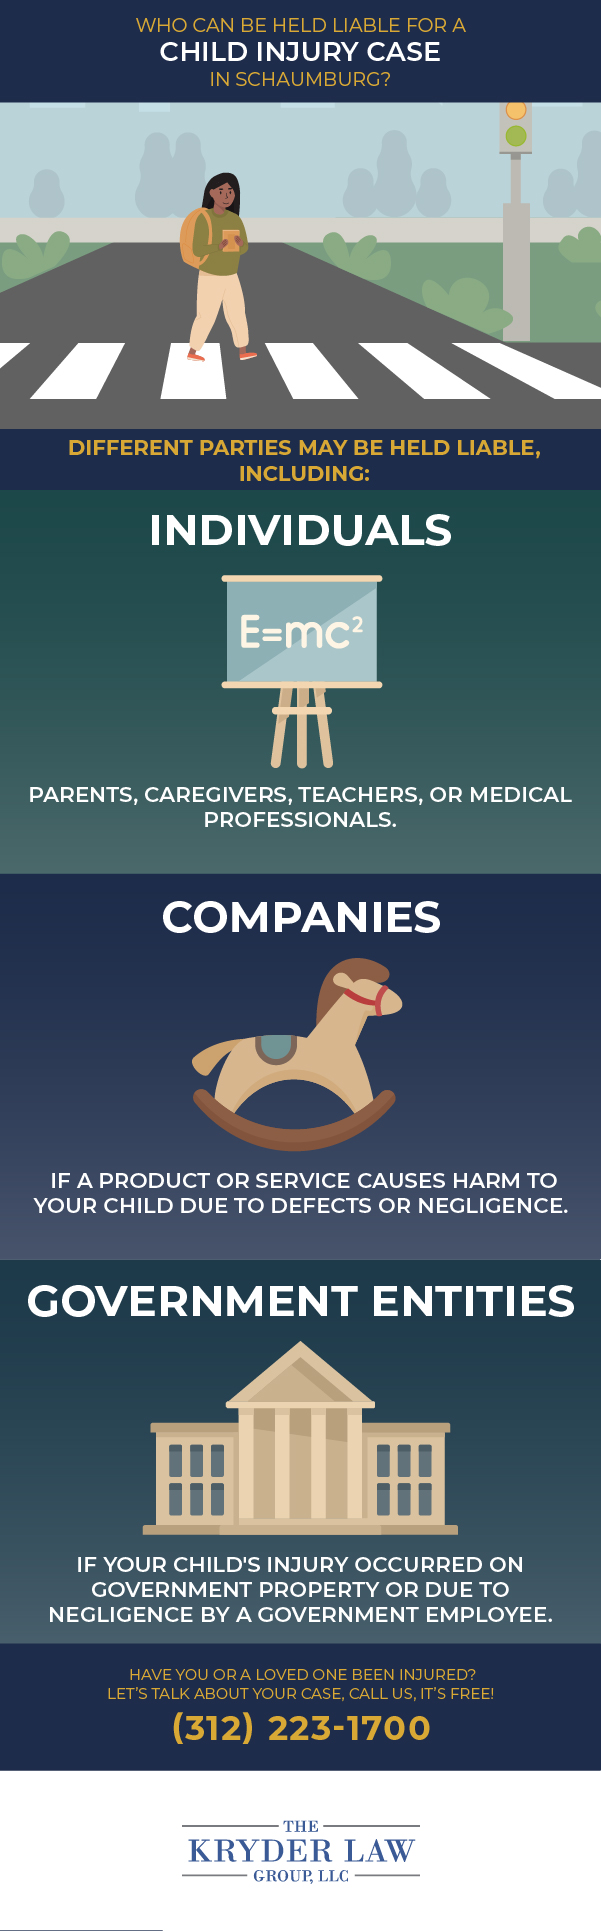 Who Can Be Held Liable for a Child Injury Case in Schaumburg Infographic